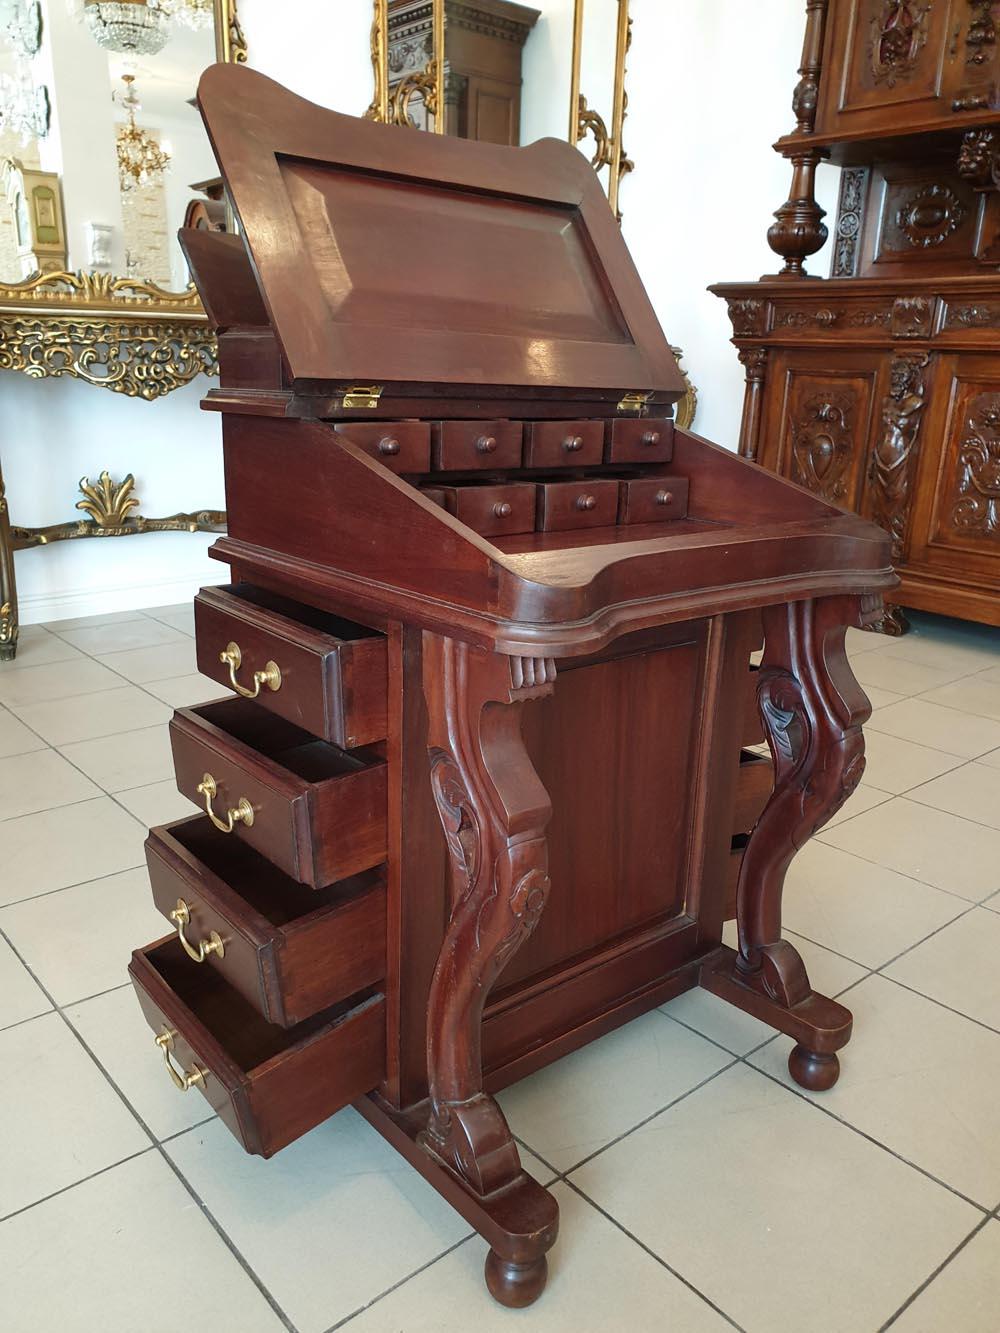 An unusual and very rare mahogany tripartite secretary. Furniture - although small in size - is extremely functional. On both sides of the furniture there are a total of eight drawers, while under the leather lined, raised writing table - another